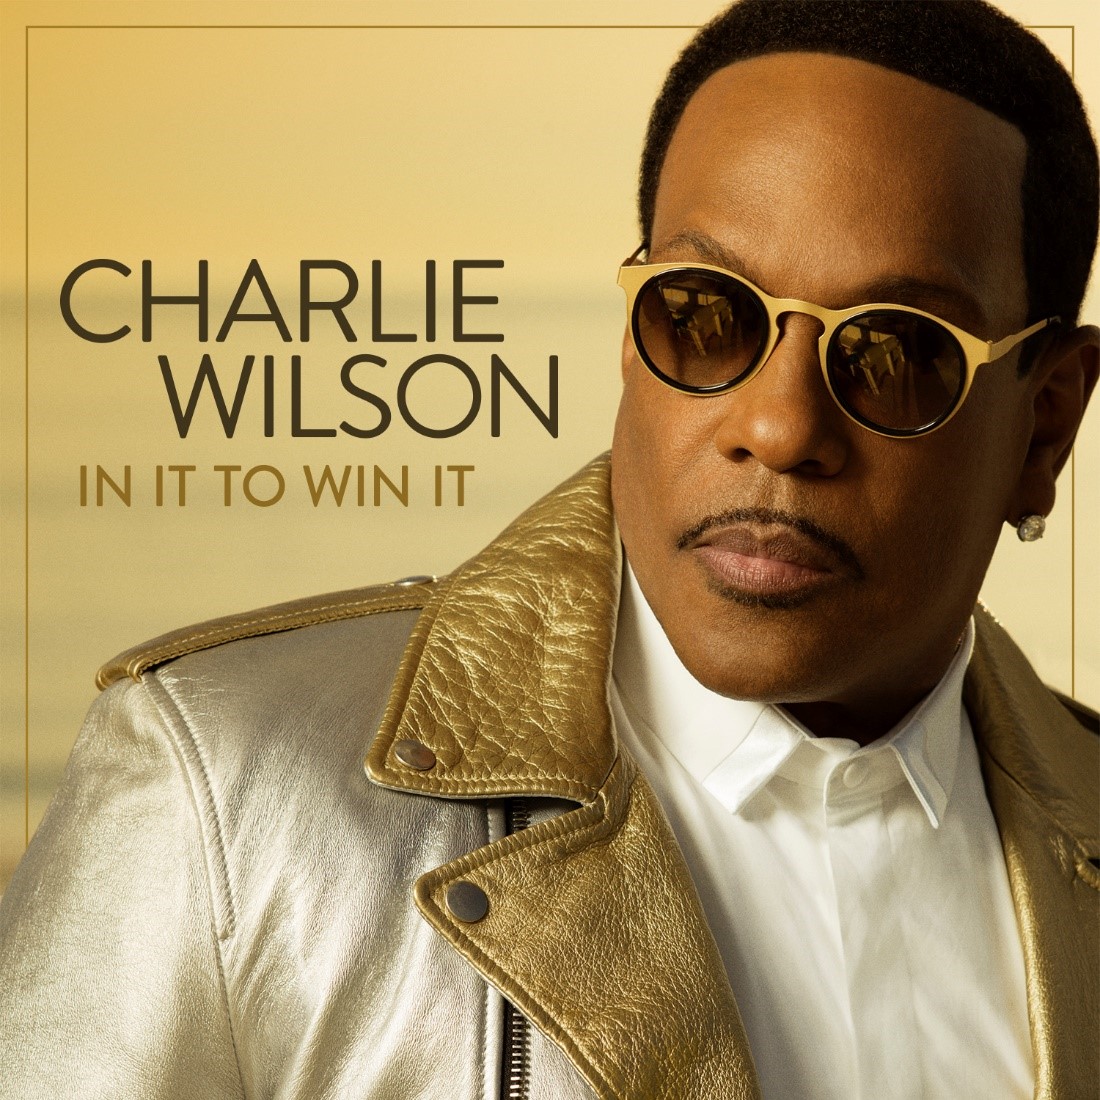 Album Review: Charlie Wilson – In It To Win It